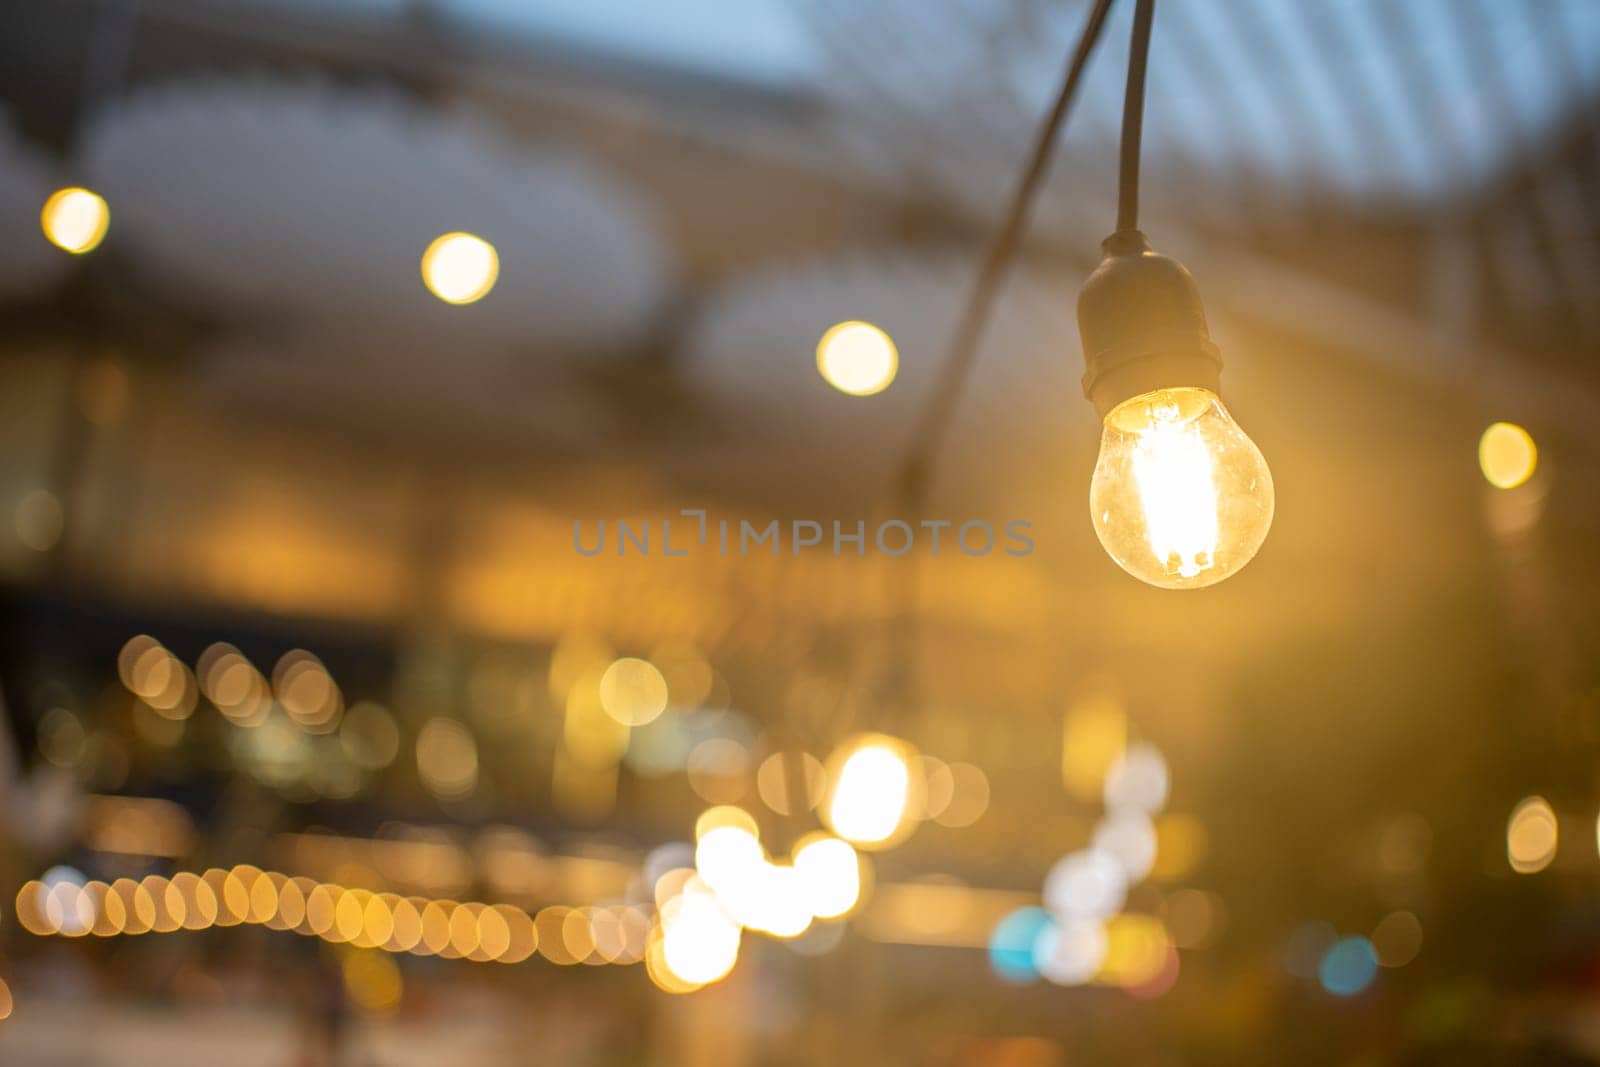 Light bulb decoration Event Festival outdoor. Holiday blur background. Close-up of outdoor garland with warm lights, with blurred bridge on background. Night festival abstract photo of garland